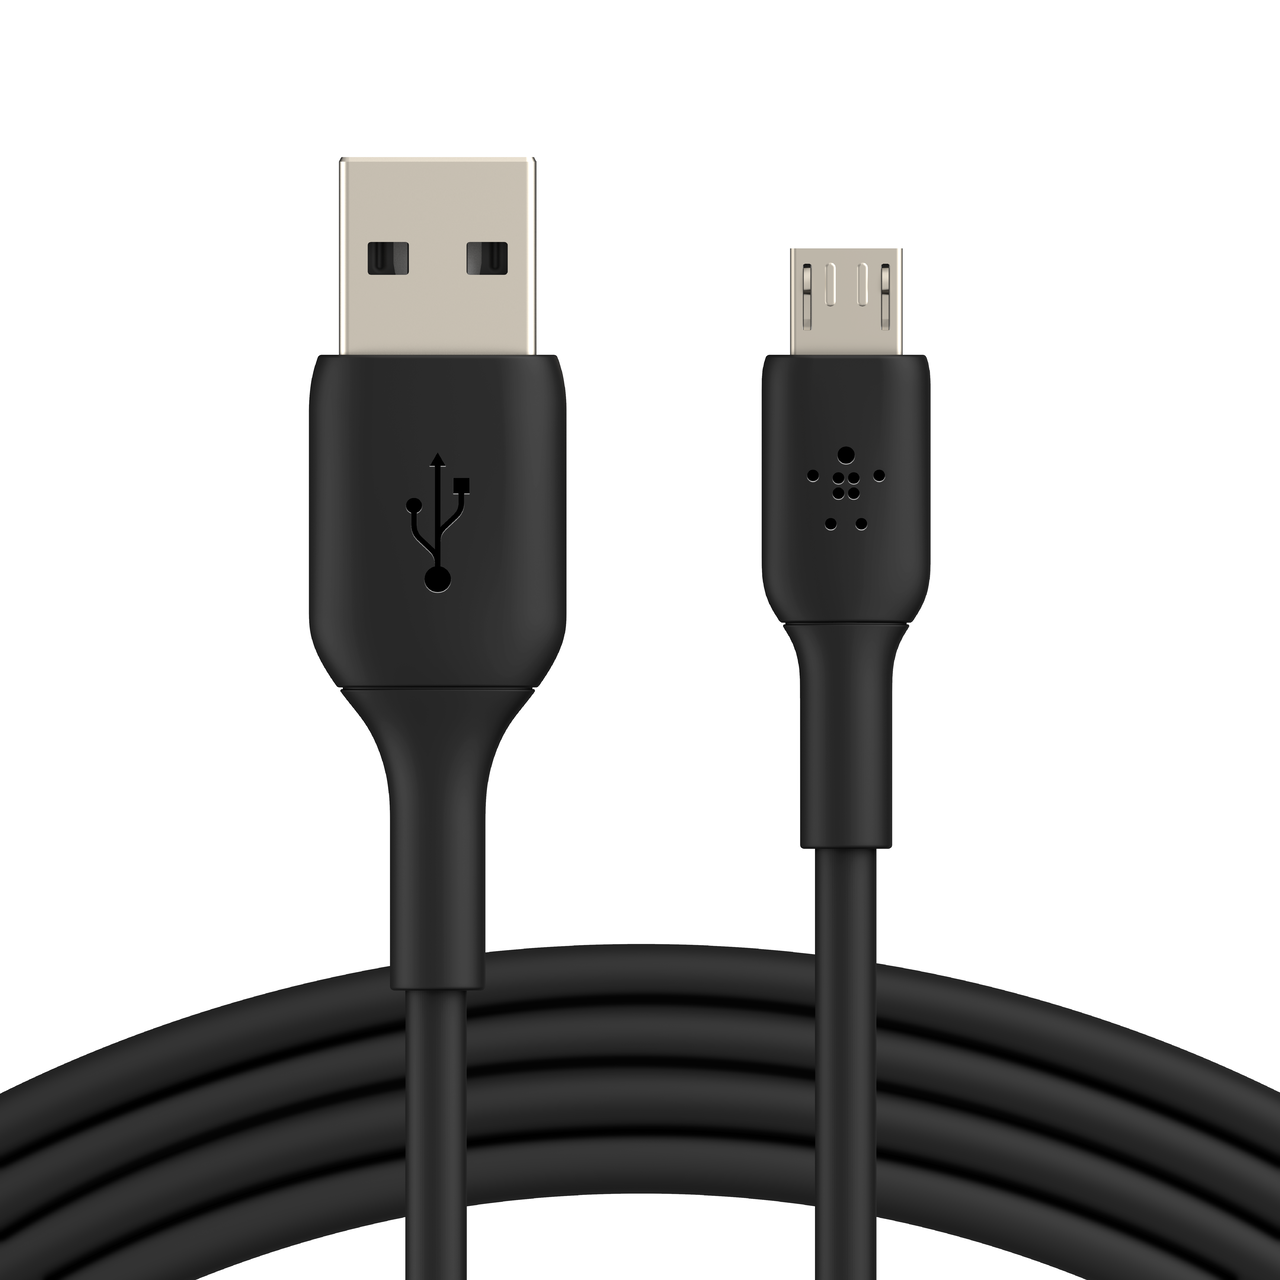 Apple Lightning to USB Cable - 1.0 Meter (3.3 Feet)